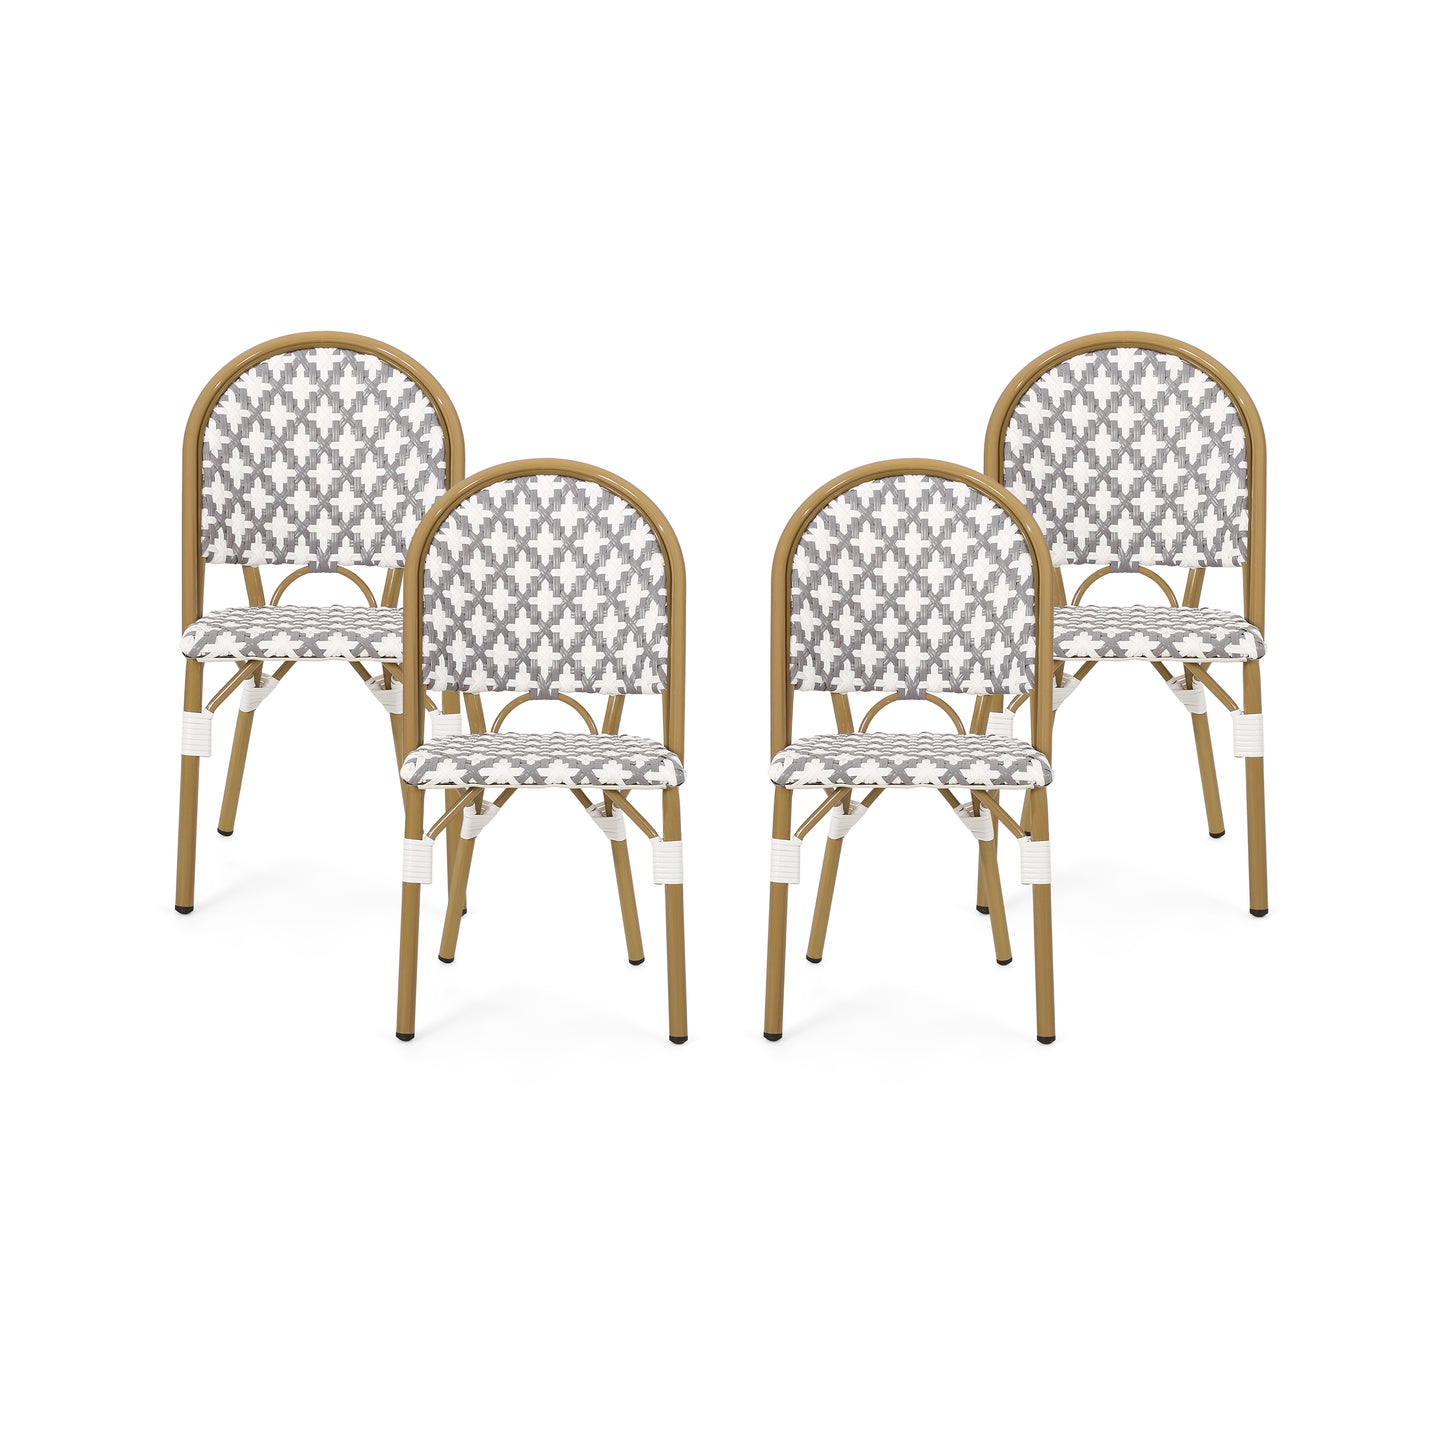 Jordy Outdoor French Bistro Chair (Set of 4)